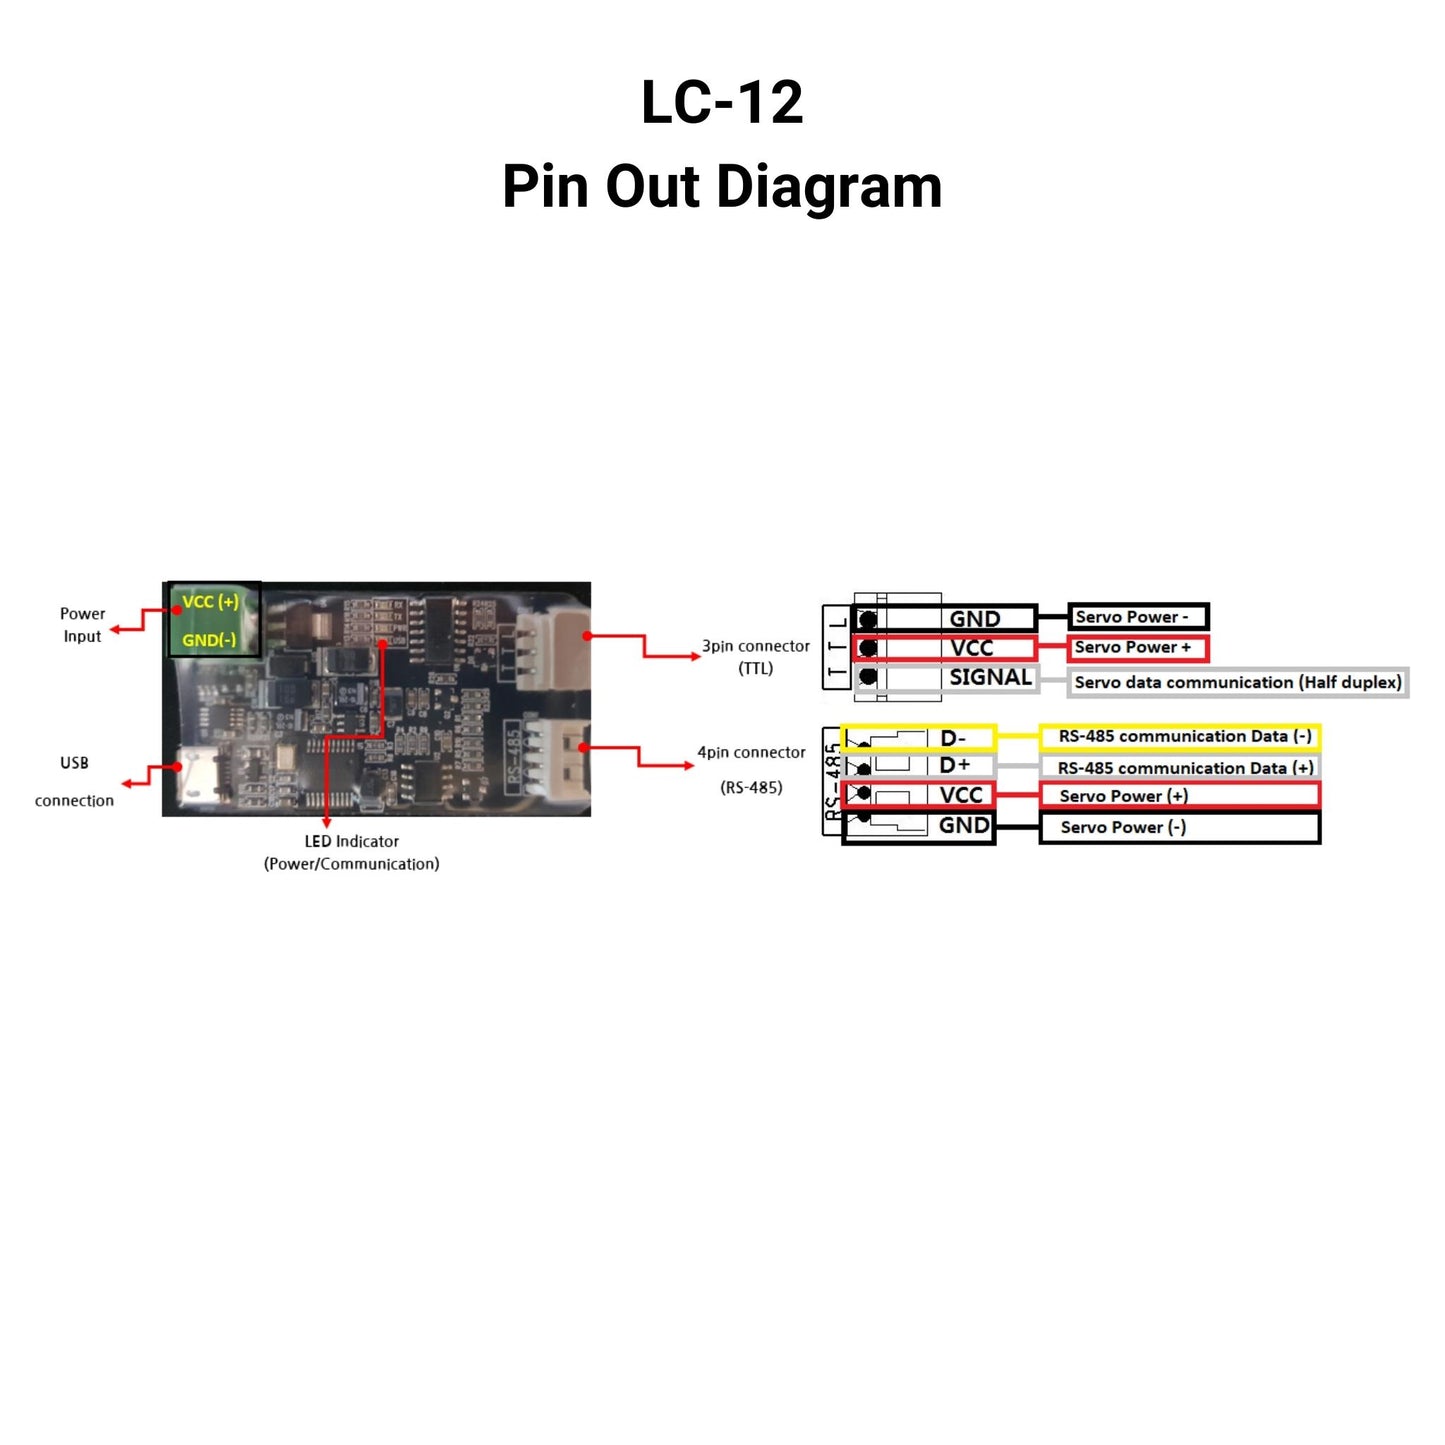 PC USB interface controller Pin Out Diagram